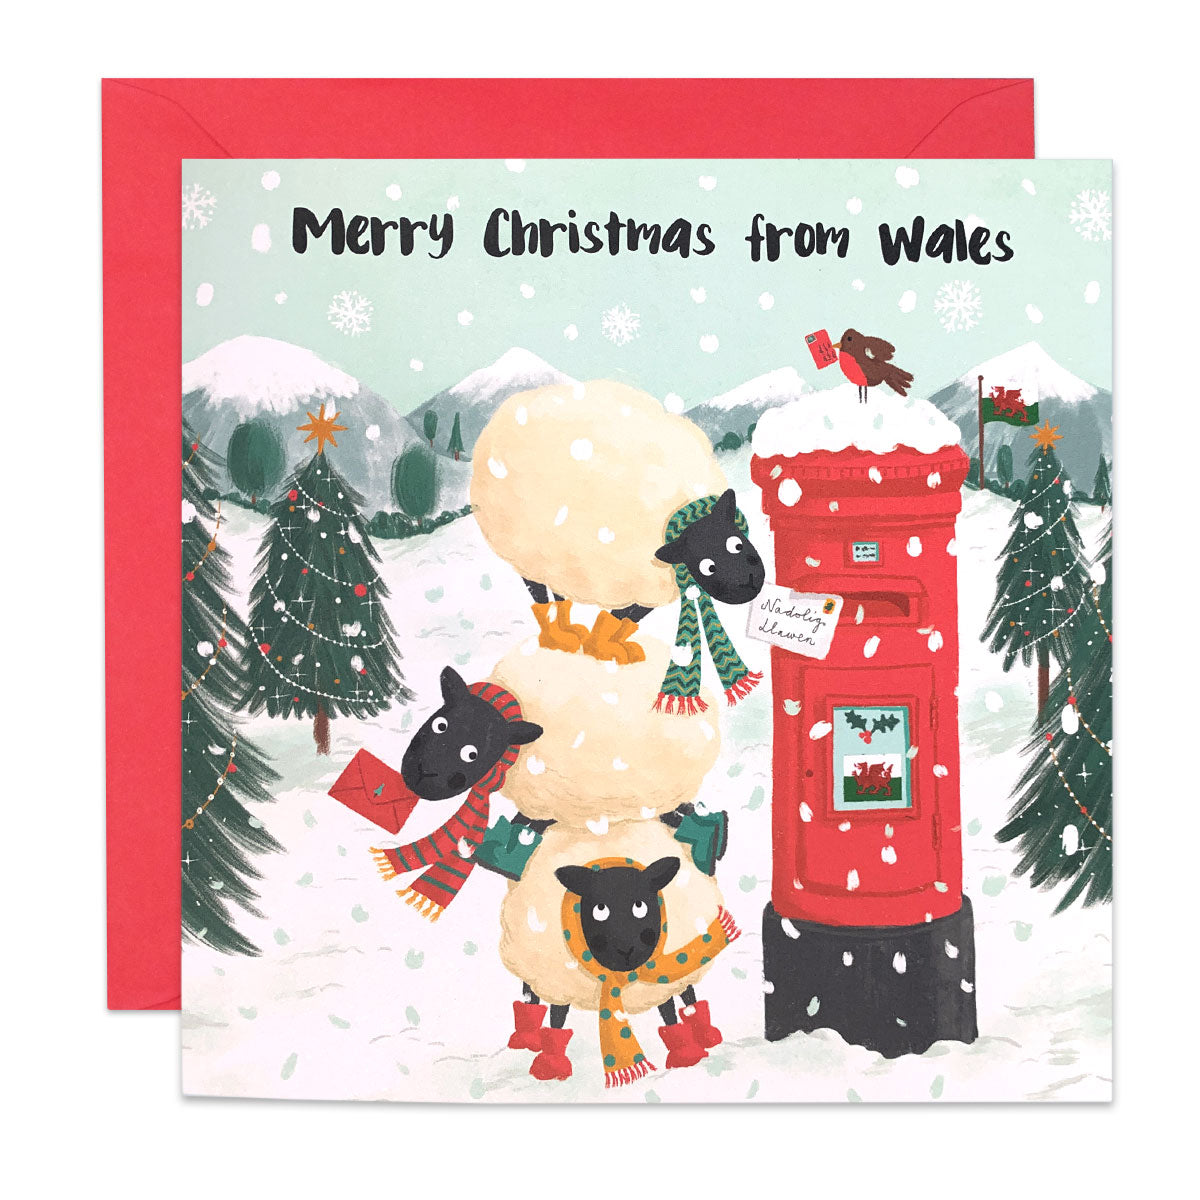 Merry Christmas from Wales Sheep Card